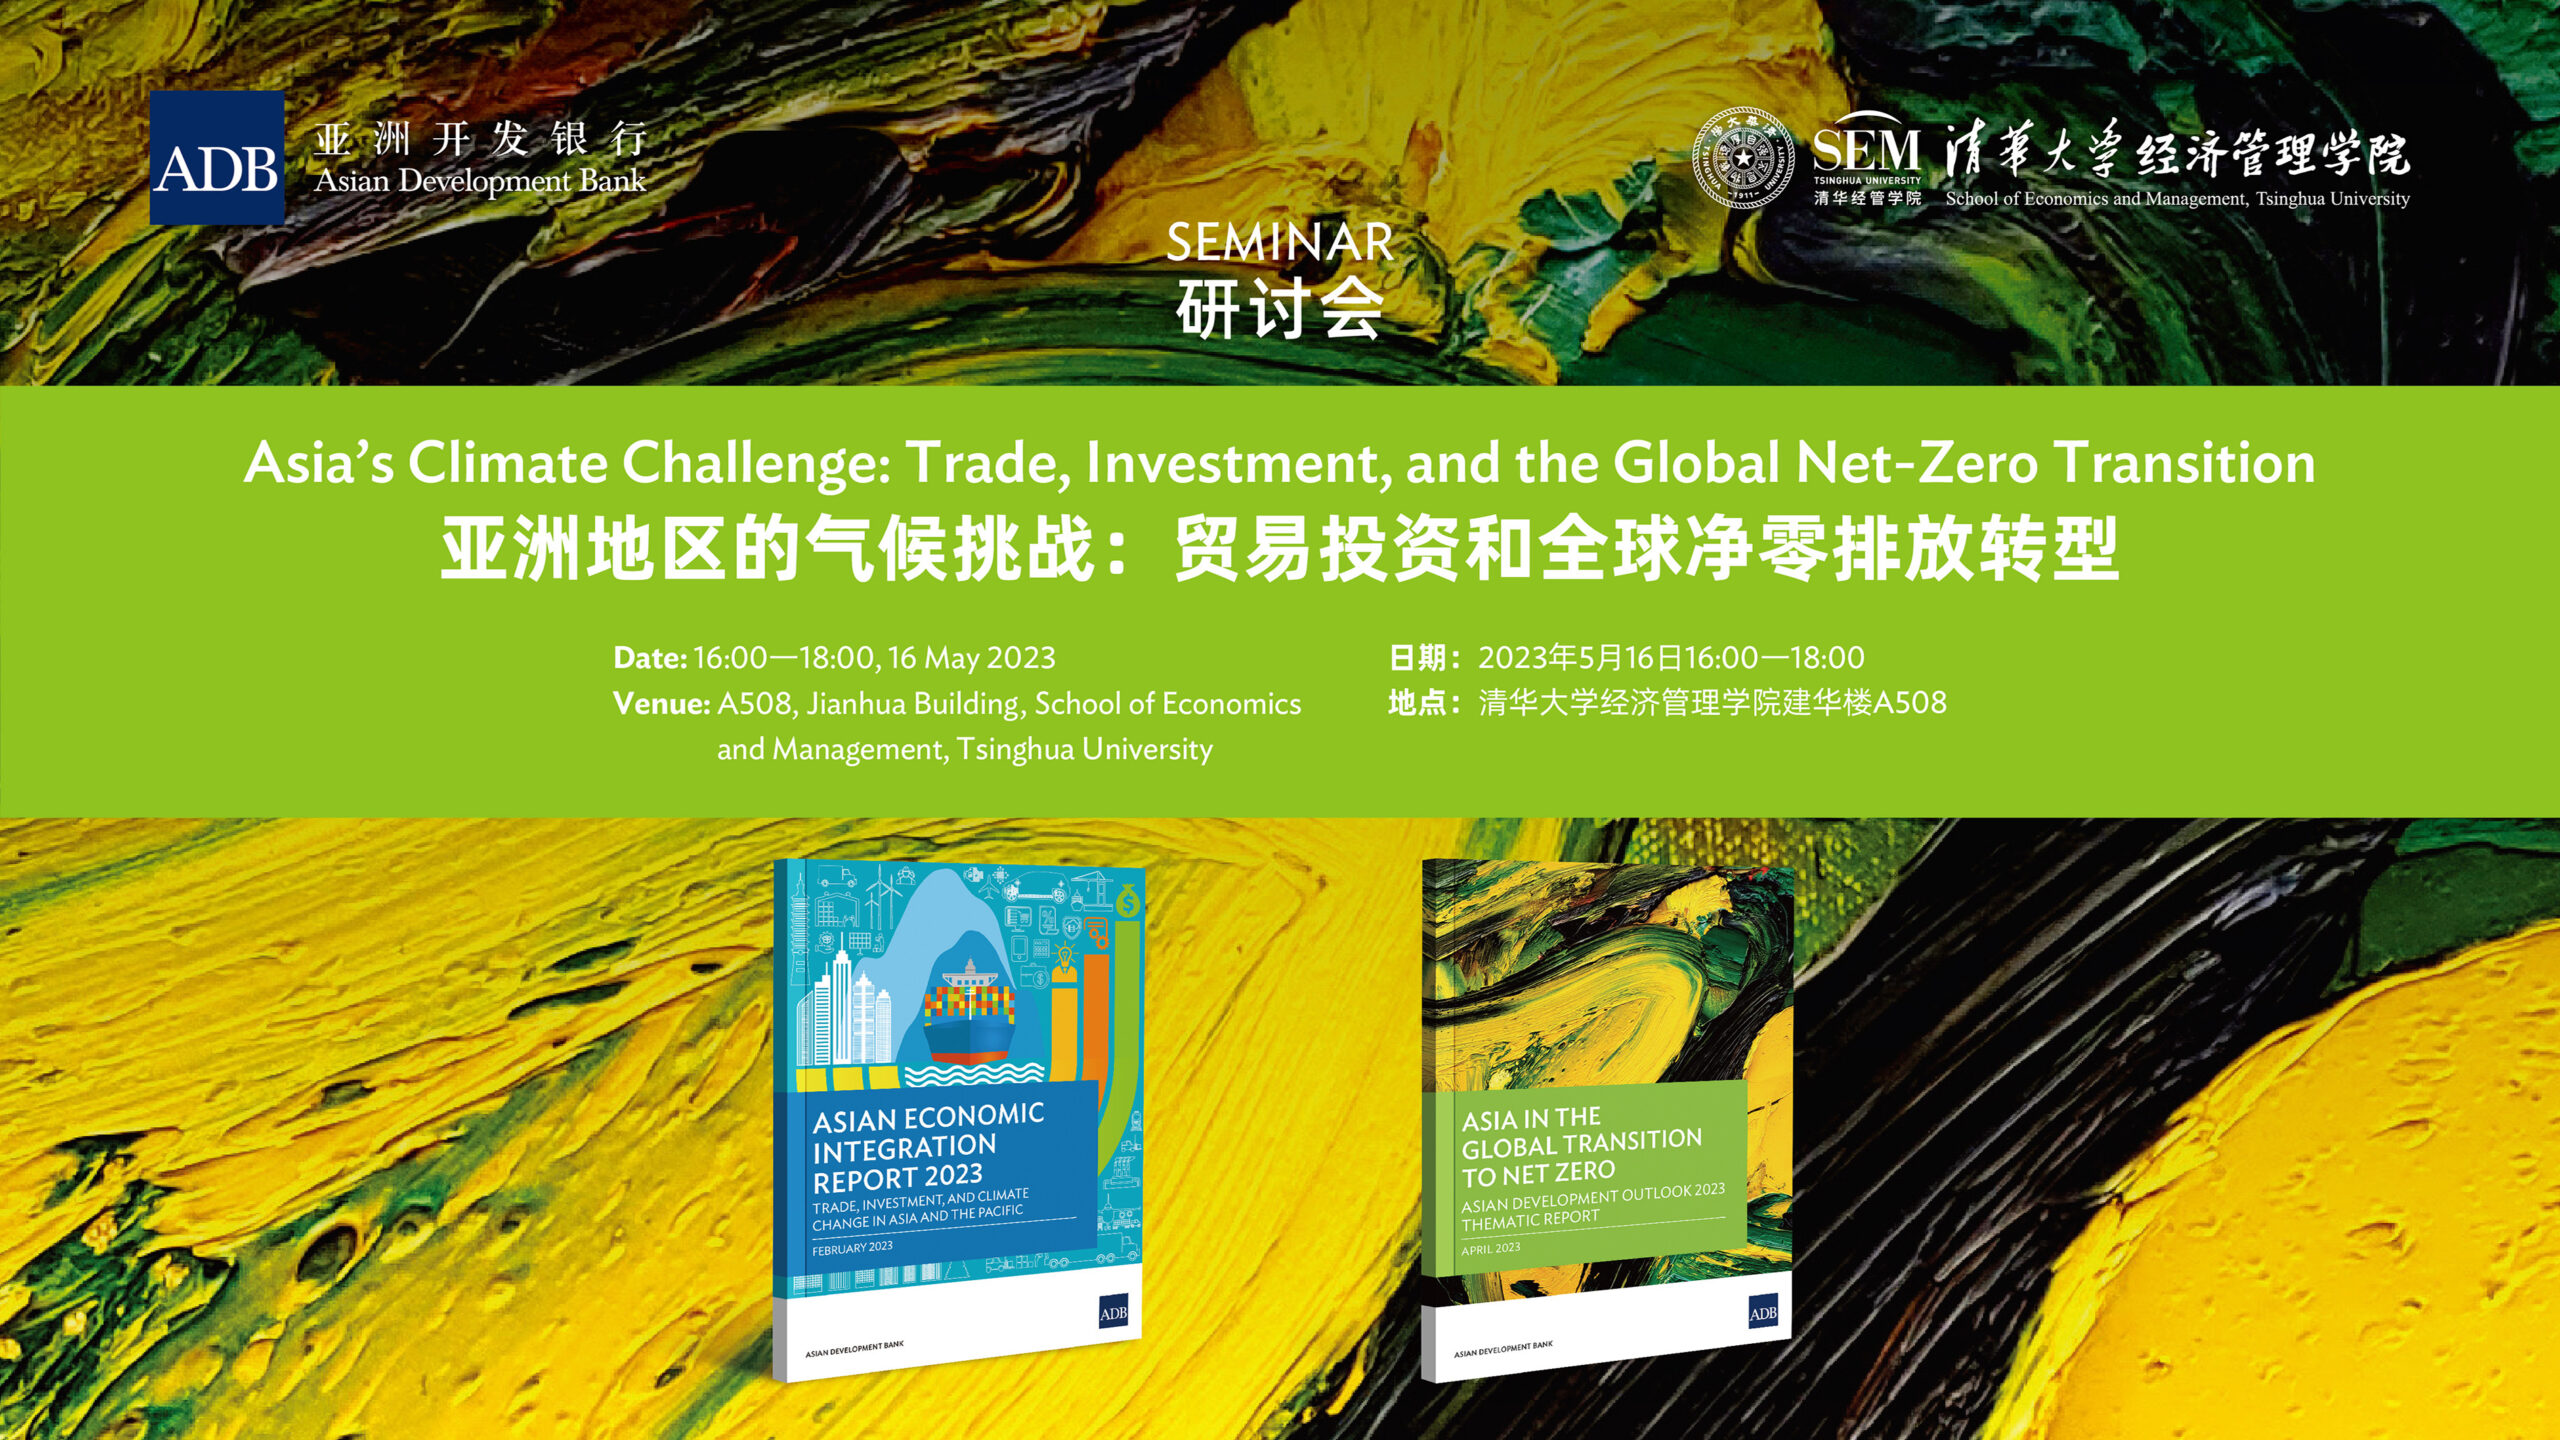 Asia’s Climate Challenge: Trade, Investment, and the Global Net-Zero Transition